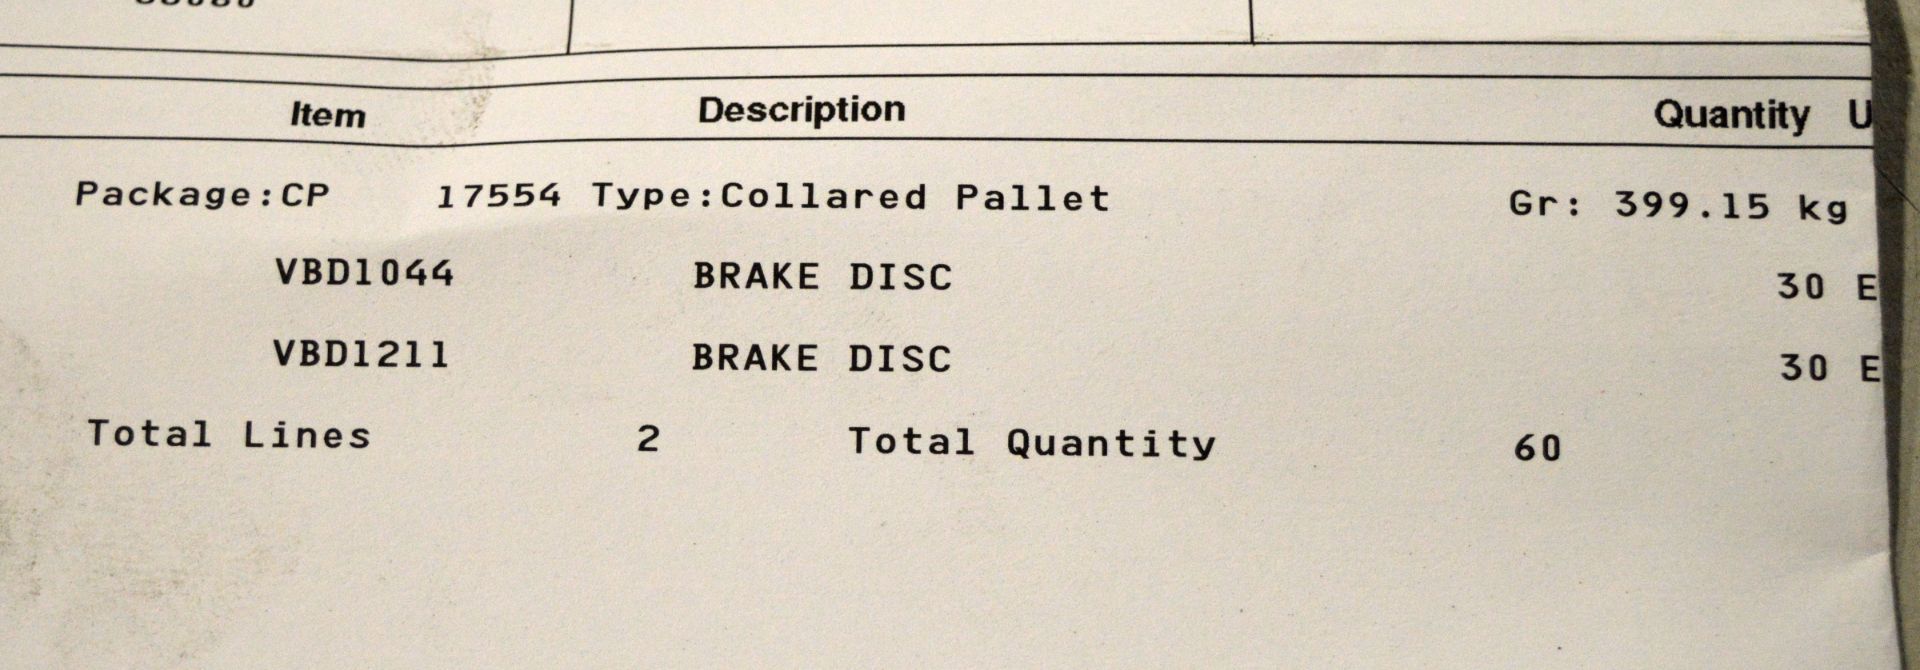 Vehicle Parts - brake discs - see picture for itinerary for model numbers and quantites - - Image 4 of 5